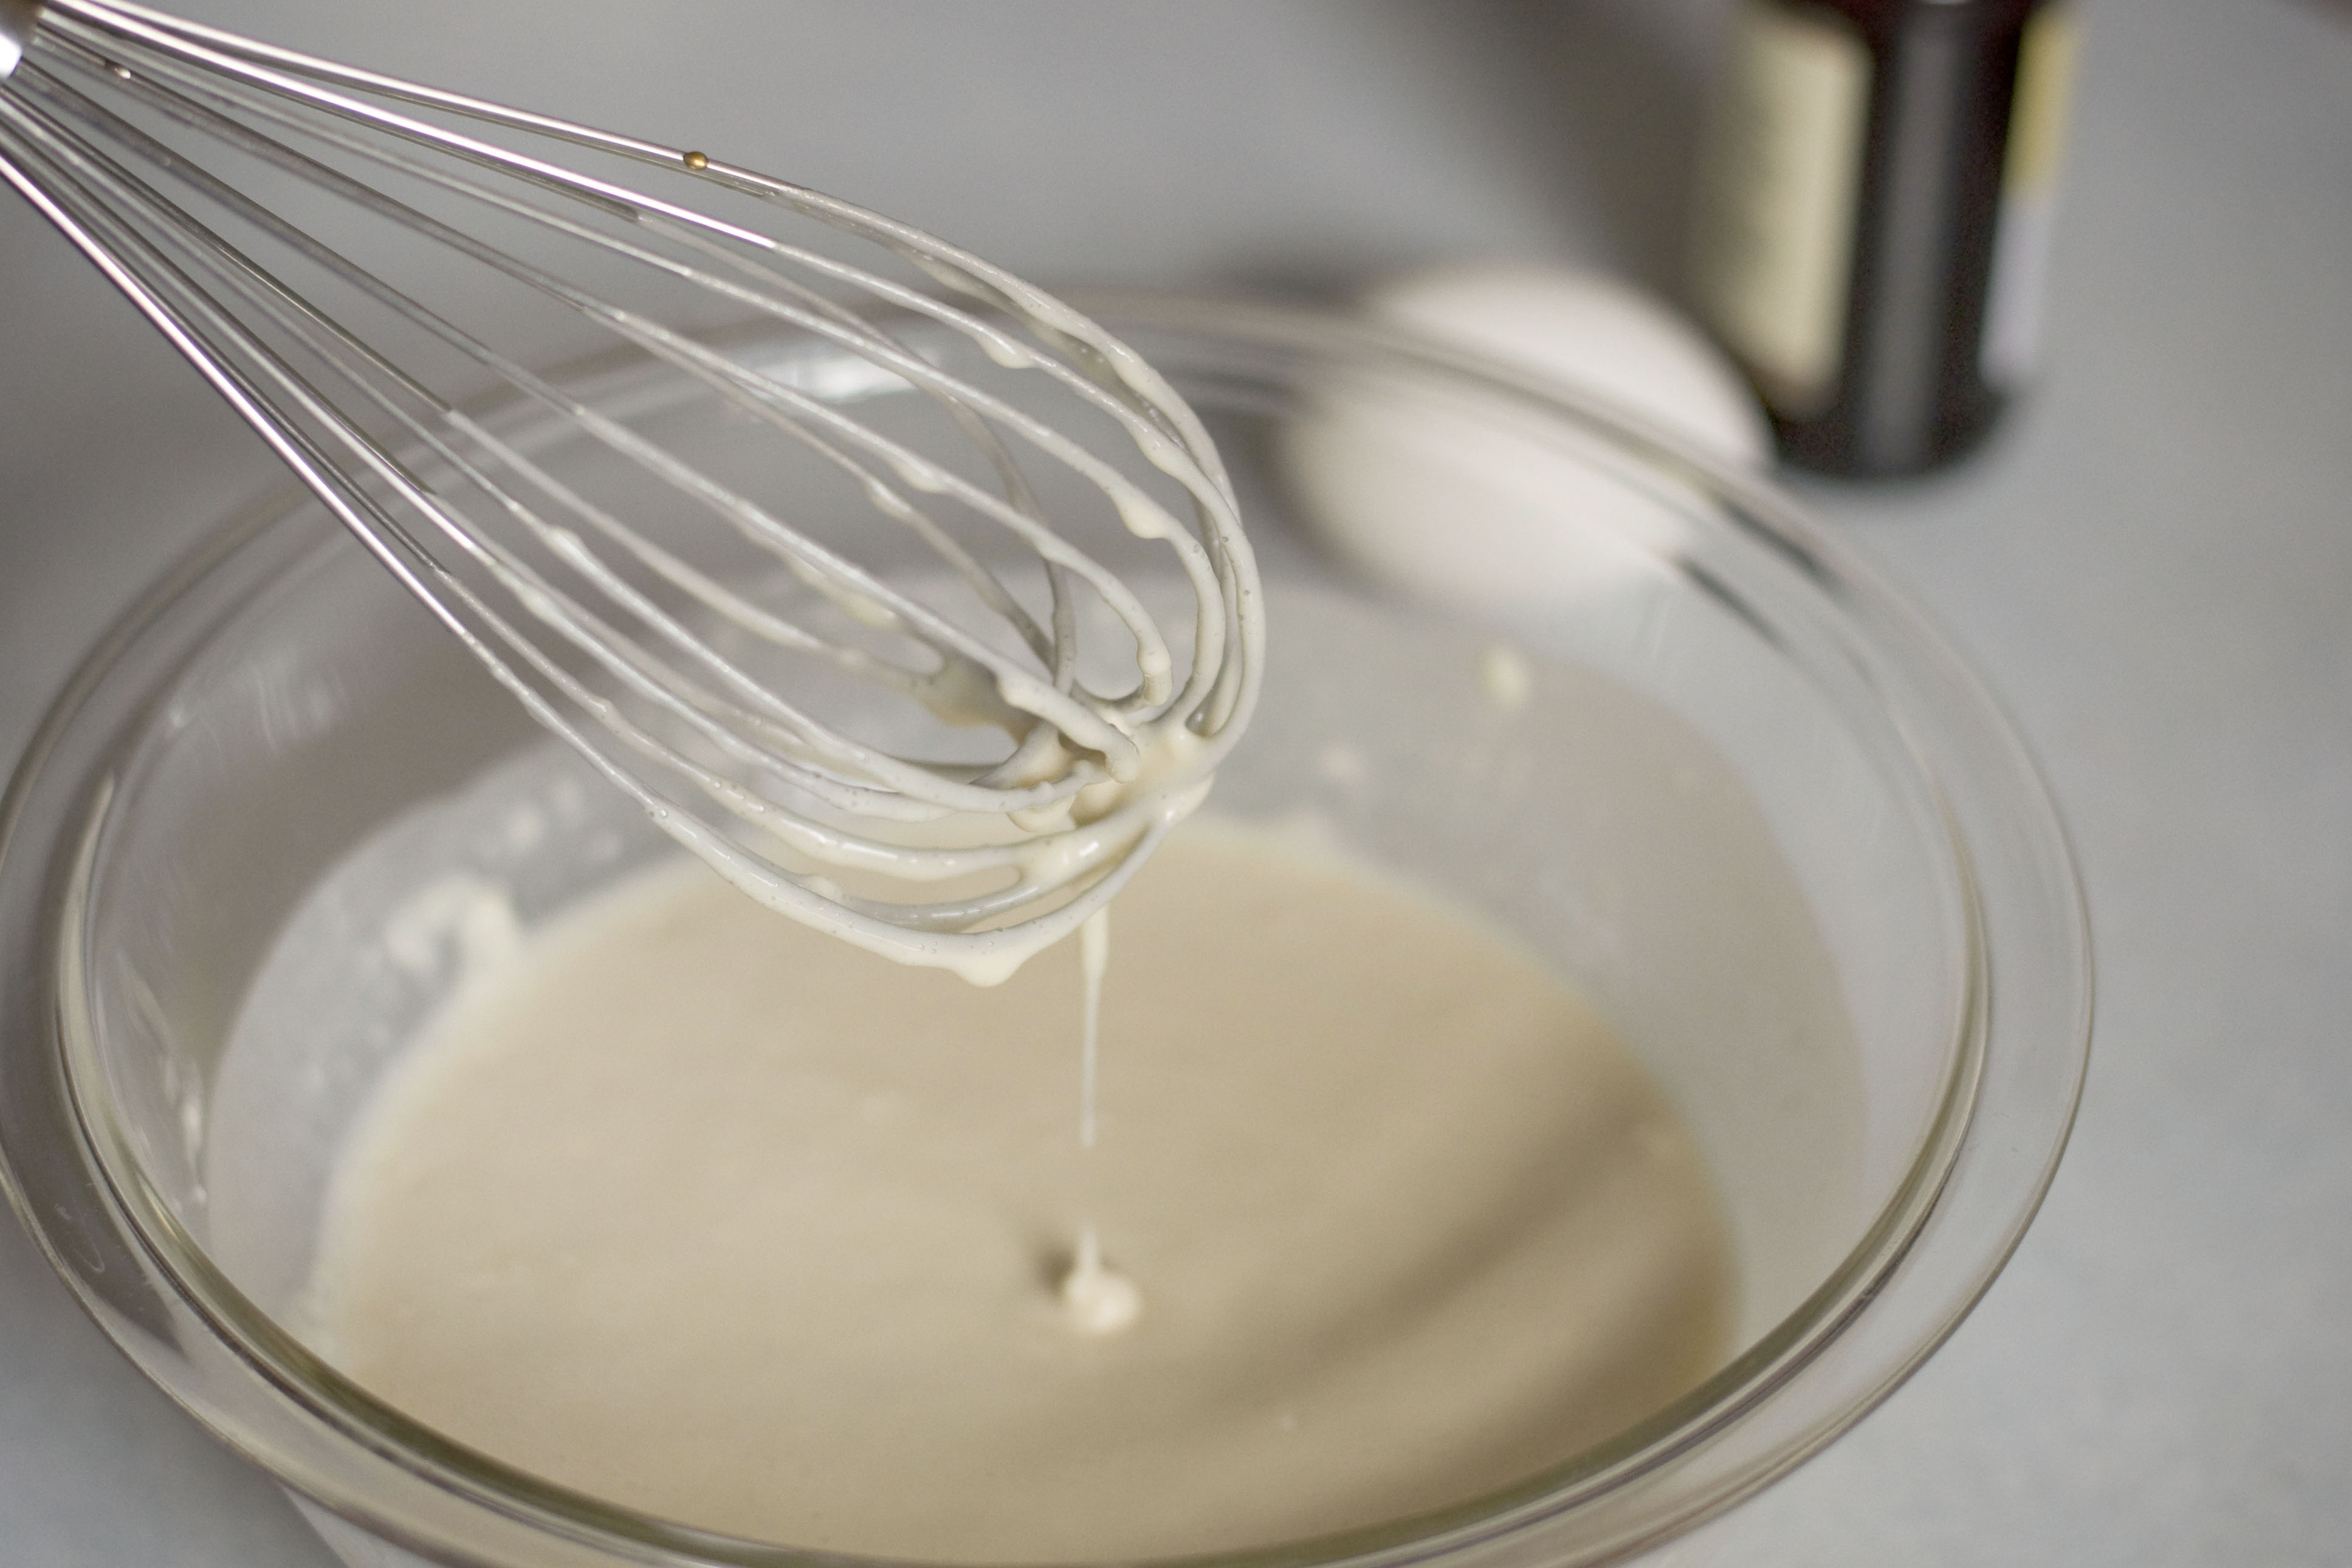 How long does pancake batter last in the freeze?